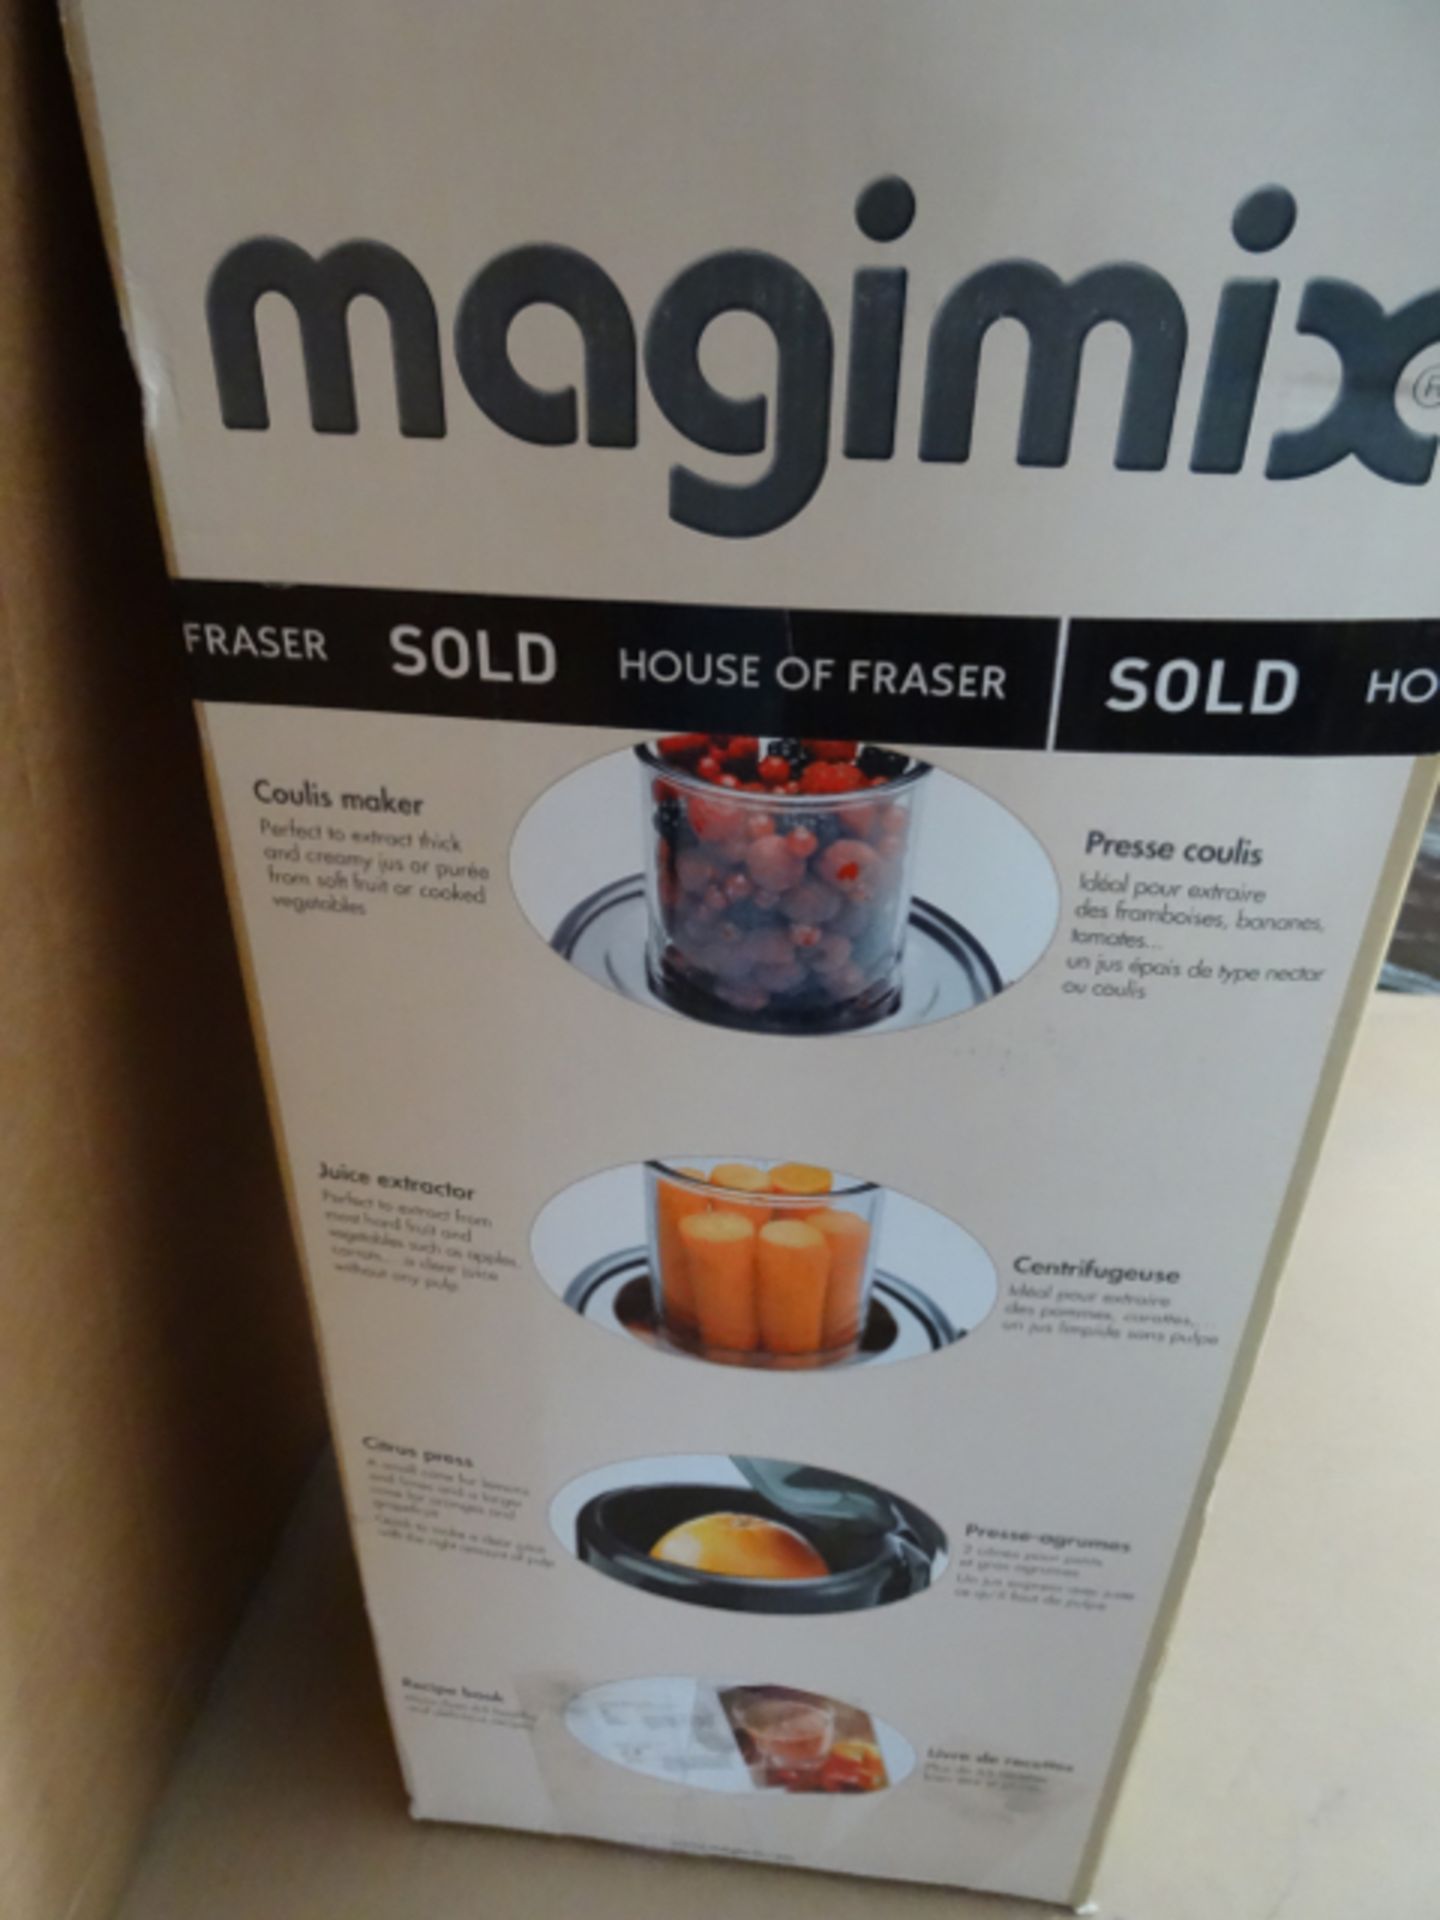 1 x Magimix Le Duo Plus XL Juice Extractor. The Le Duo Plus XL juice extractor, citrus press and - Image 2 of 3